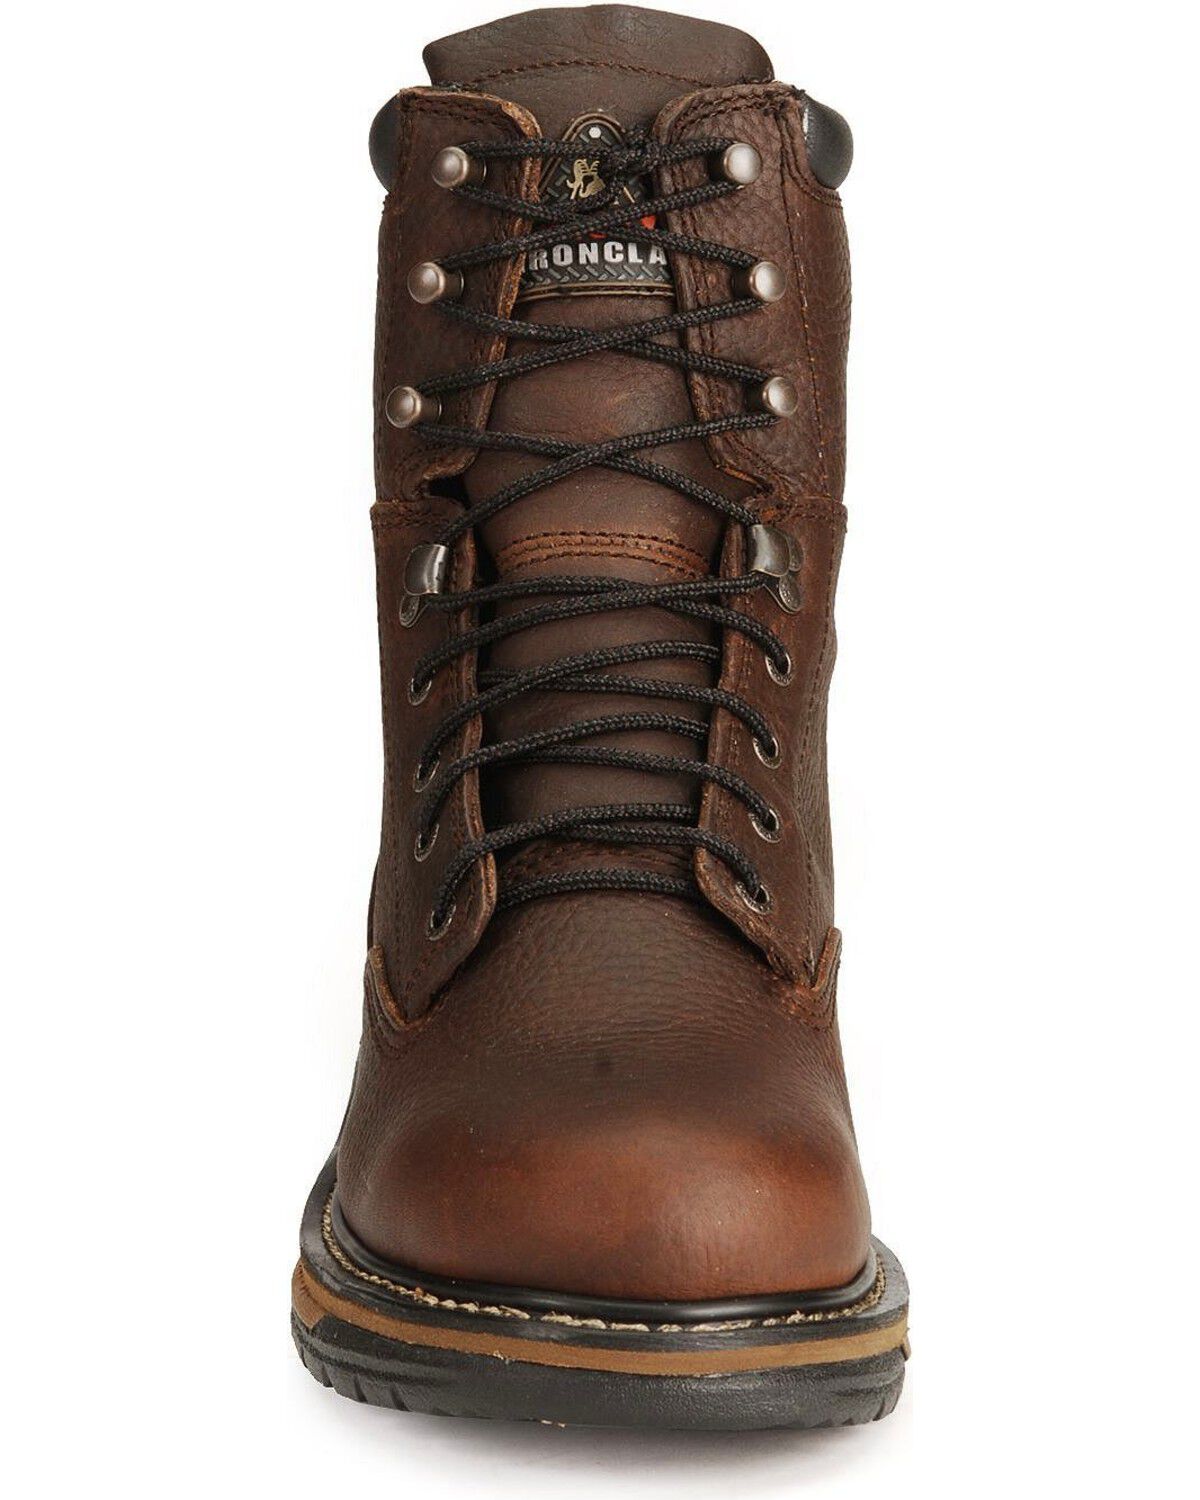 ironclad work boots